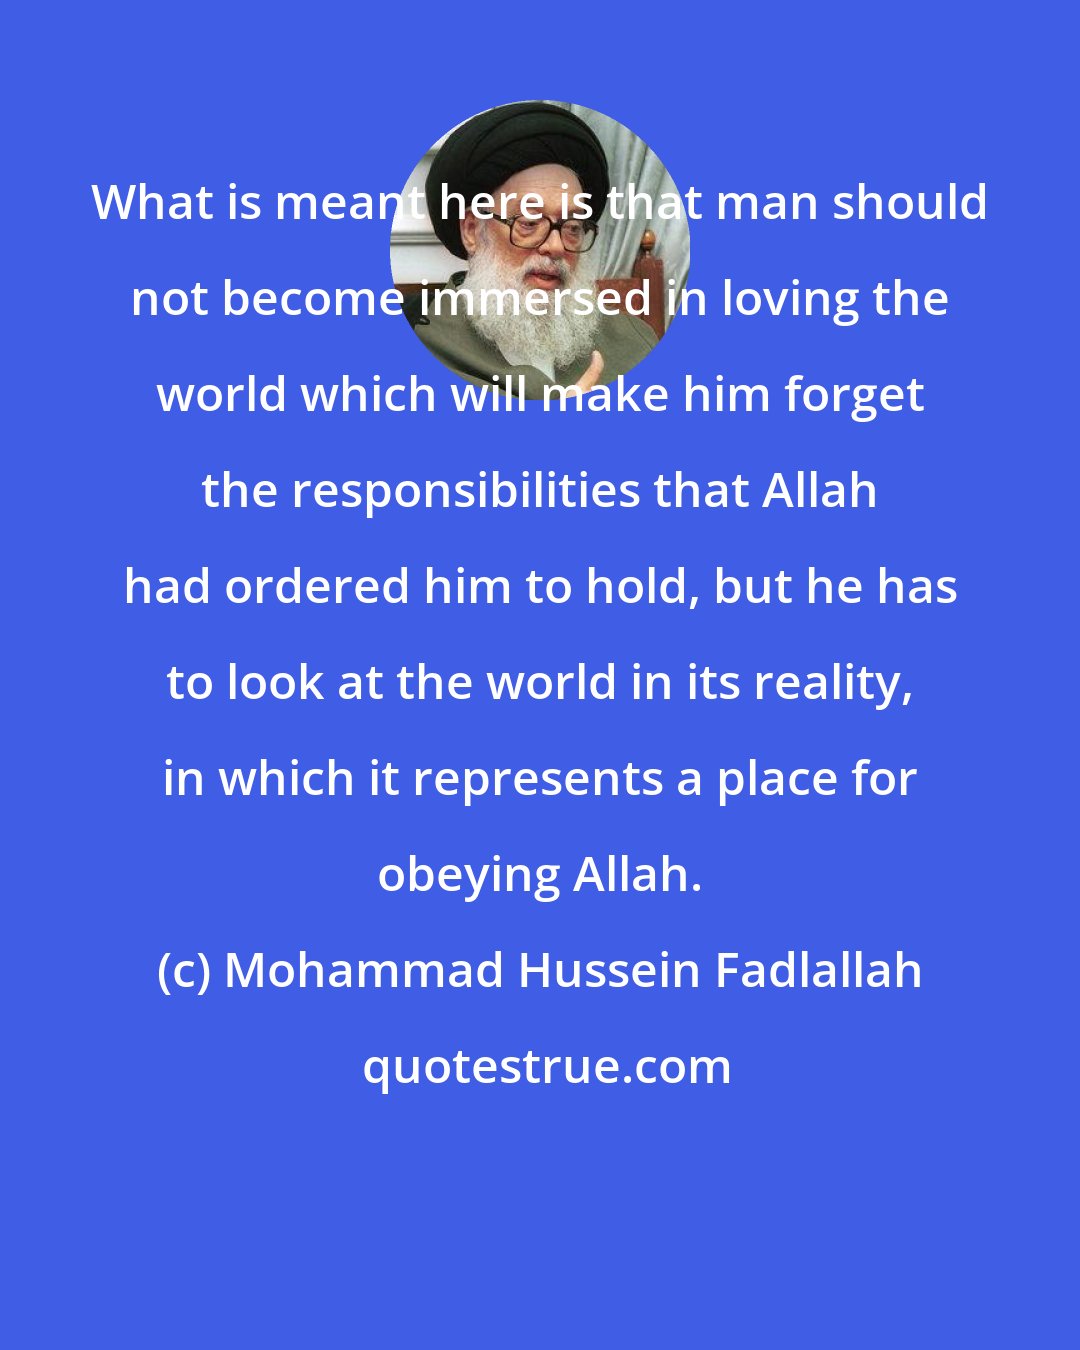 Mohammad Hussein Fadlallah: What is meant here is that man should not become immersed in loving the world which will make him forget the responsibilities that Allah had ordered him to hold, but he has to look at the world in its reality, in which it represents a place for obeying Allah.